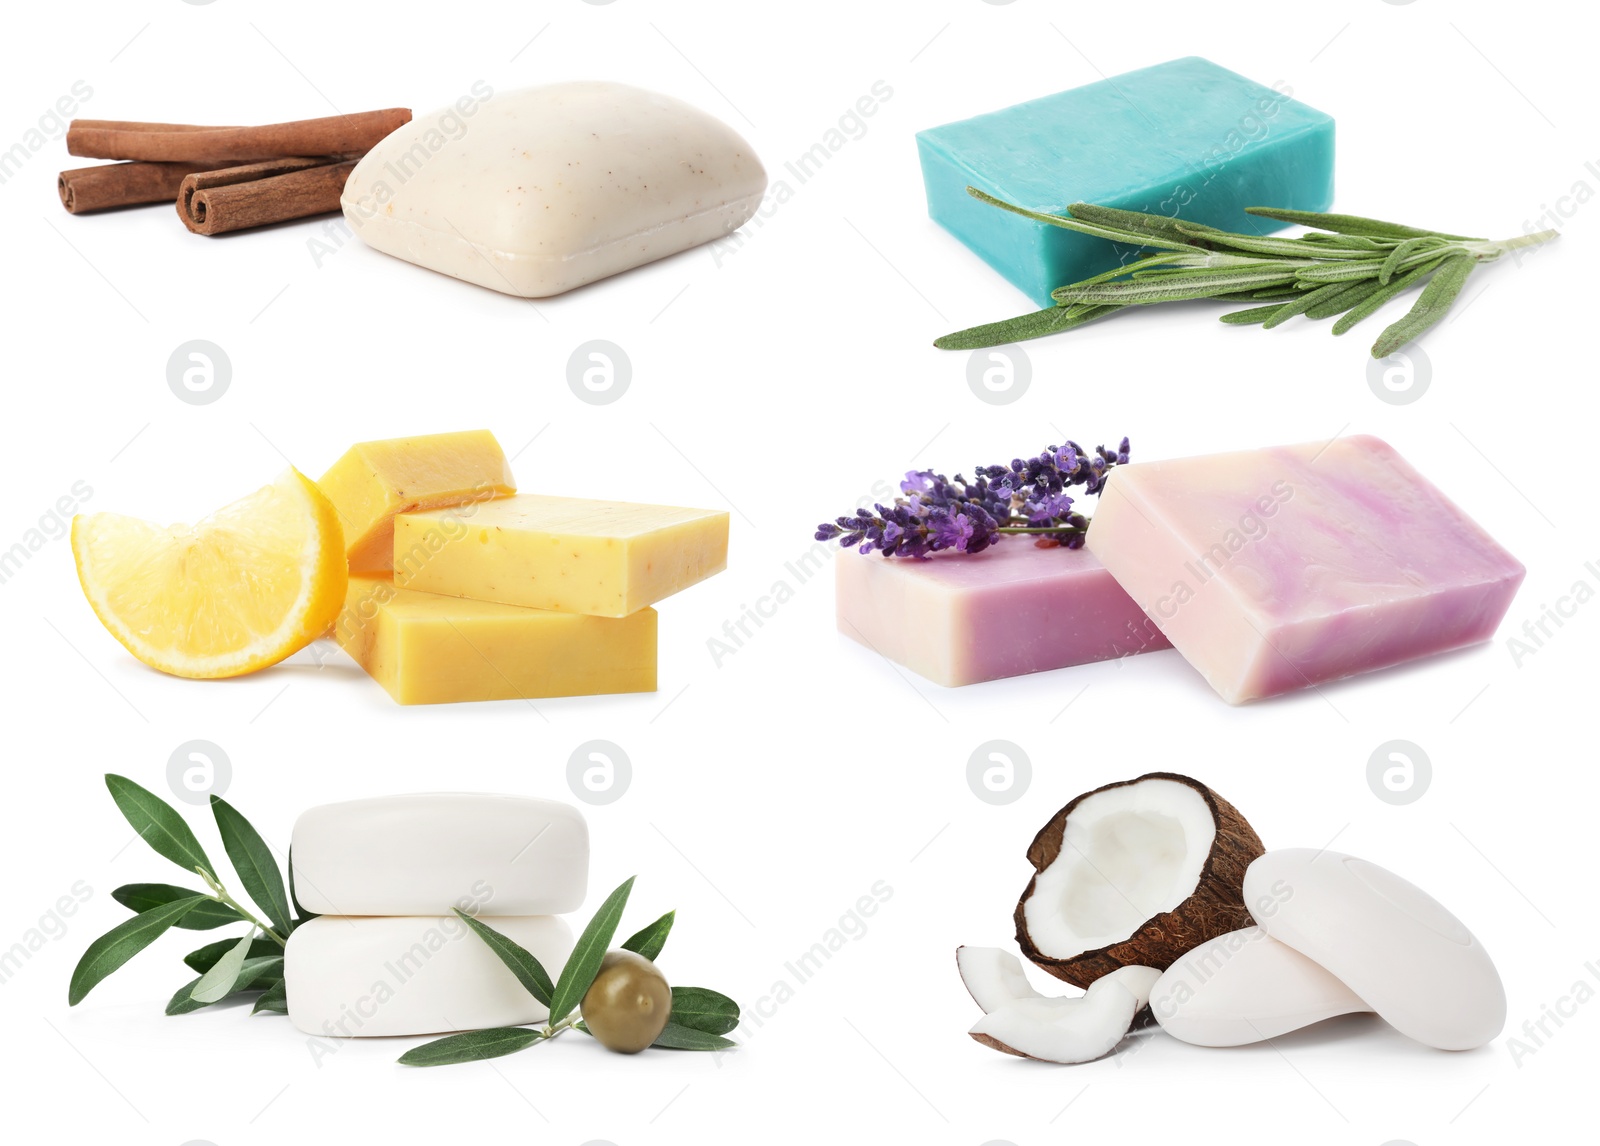 Image of Set of different soap bars and ingredients on white background